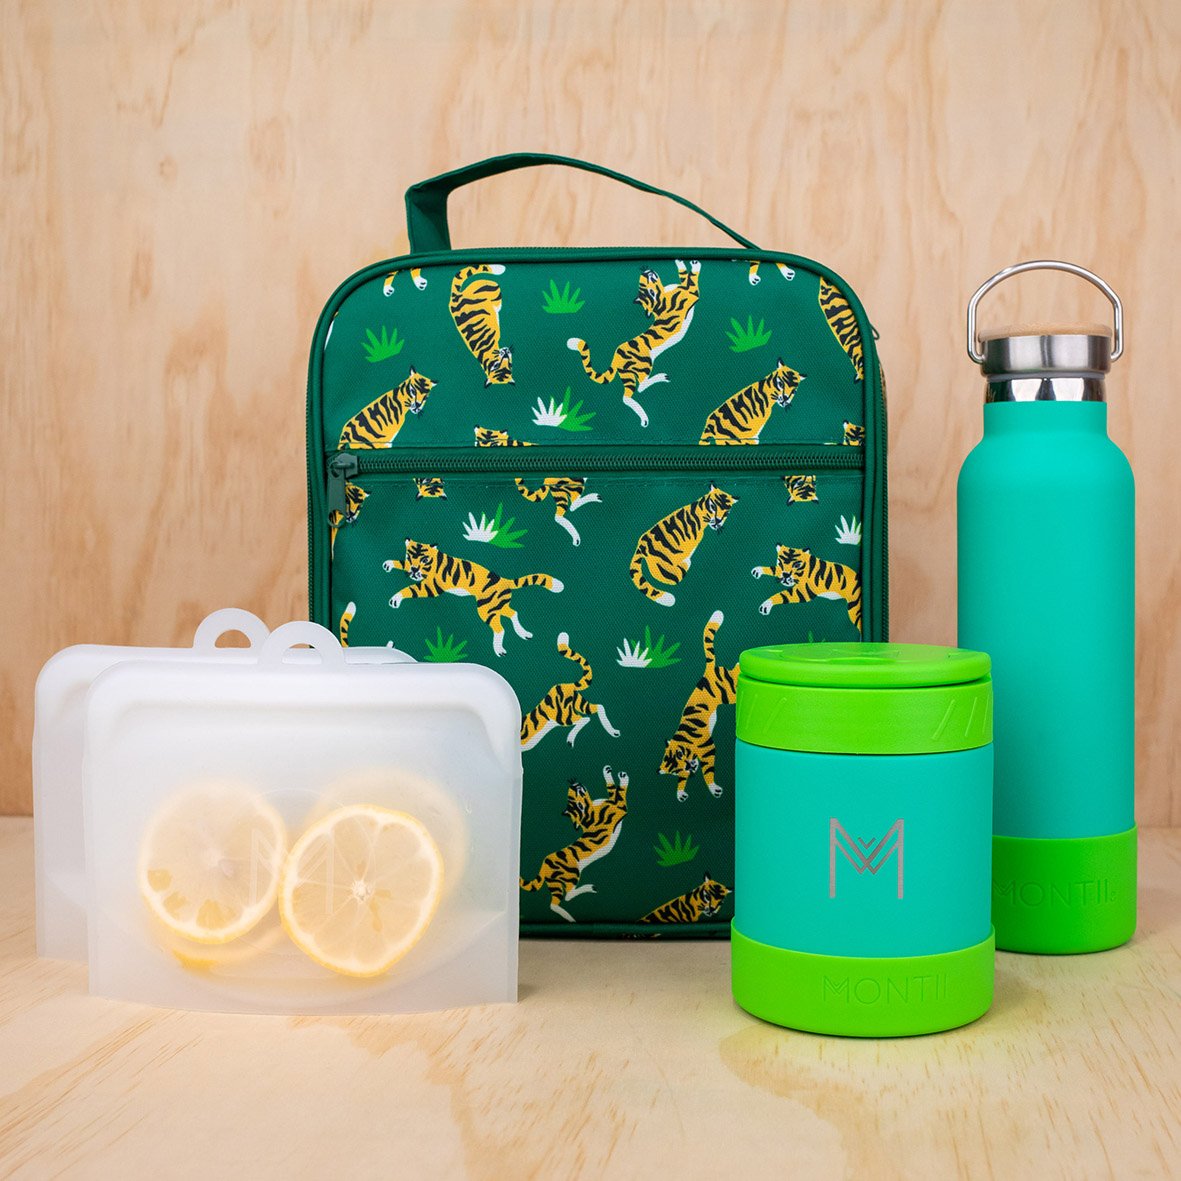 MontiiCo Original Insulated Bottle | Kiwi Green | For Kids & Adults